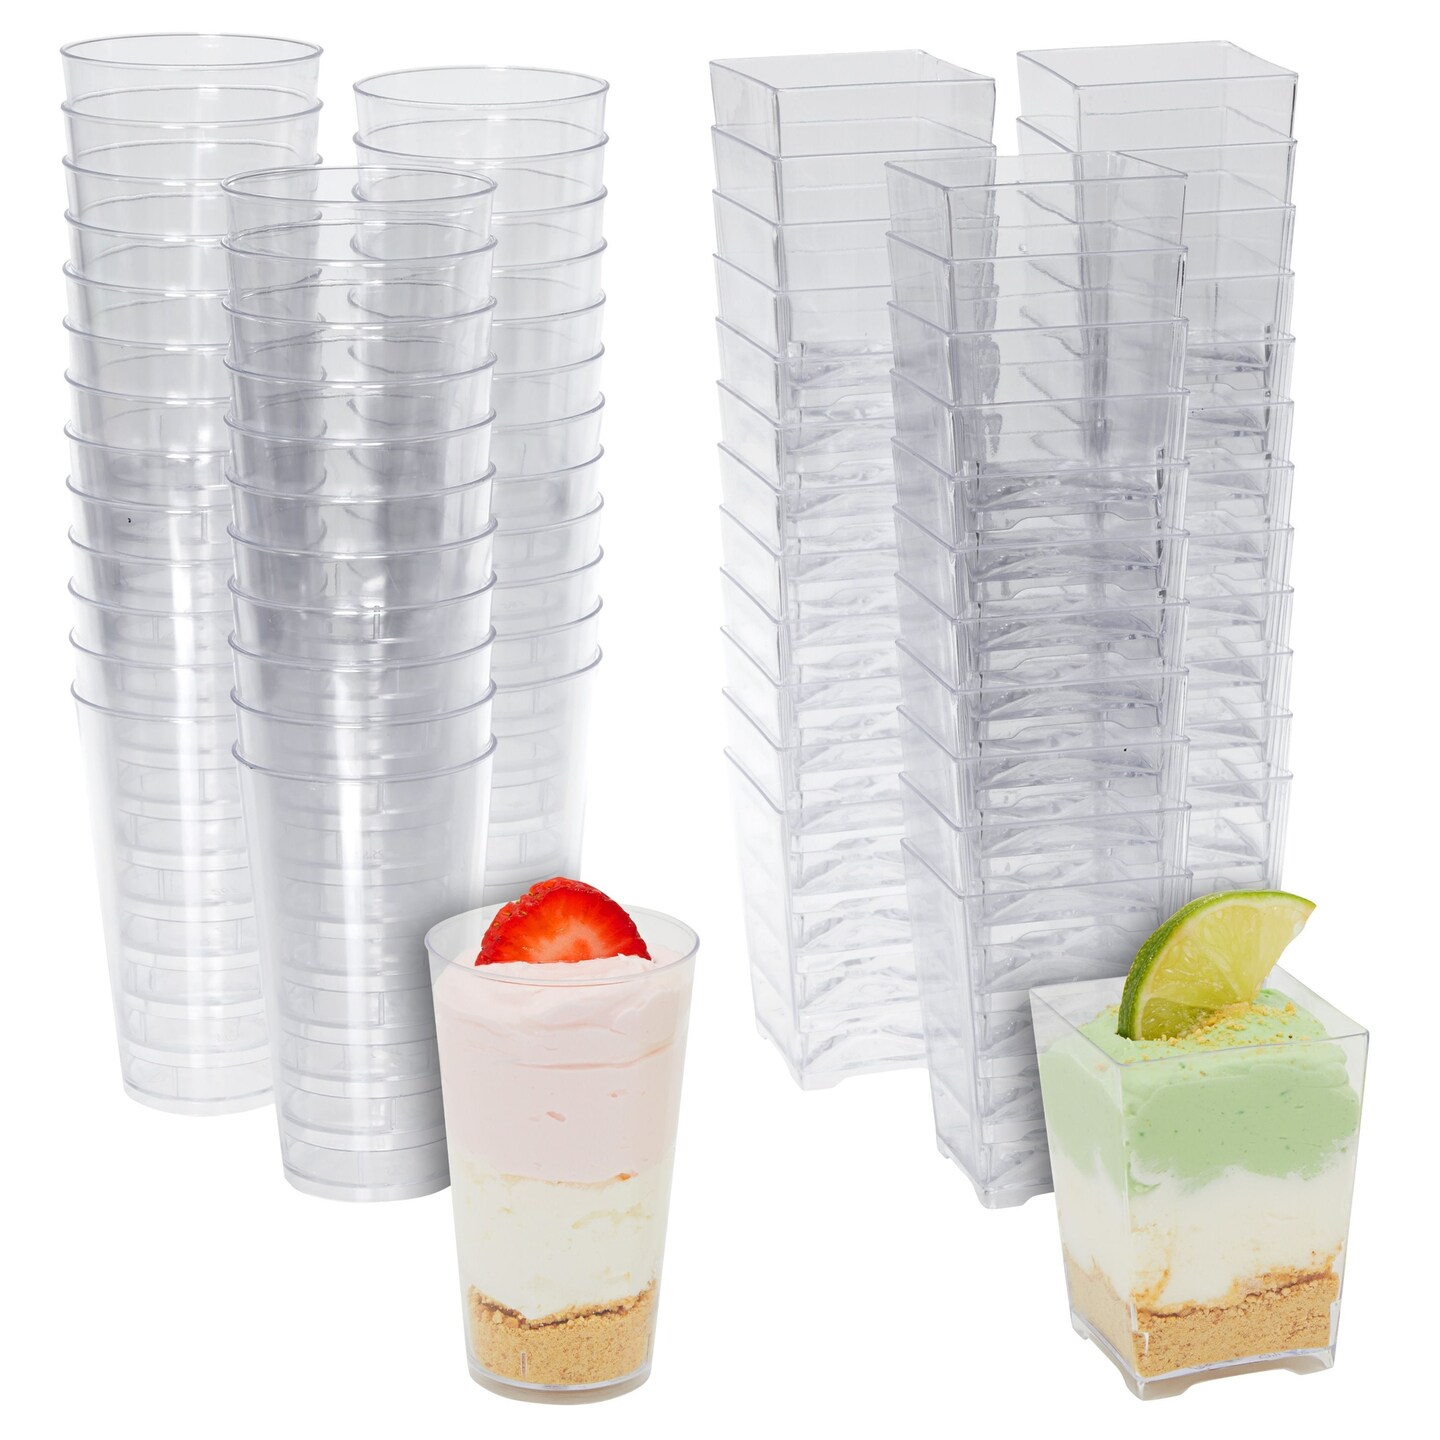 50 Pack Mini Slanted Dessert Cups for Appetizers, Parties, and Weddings,  Plastic Shot Glasses (2.5 oz)